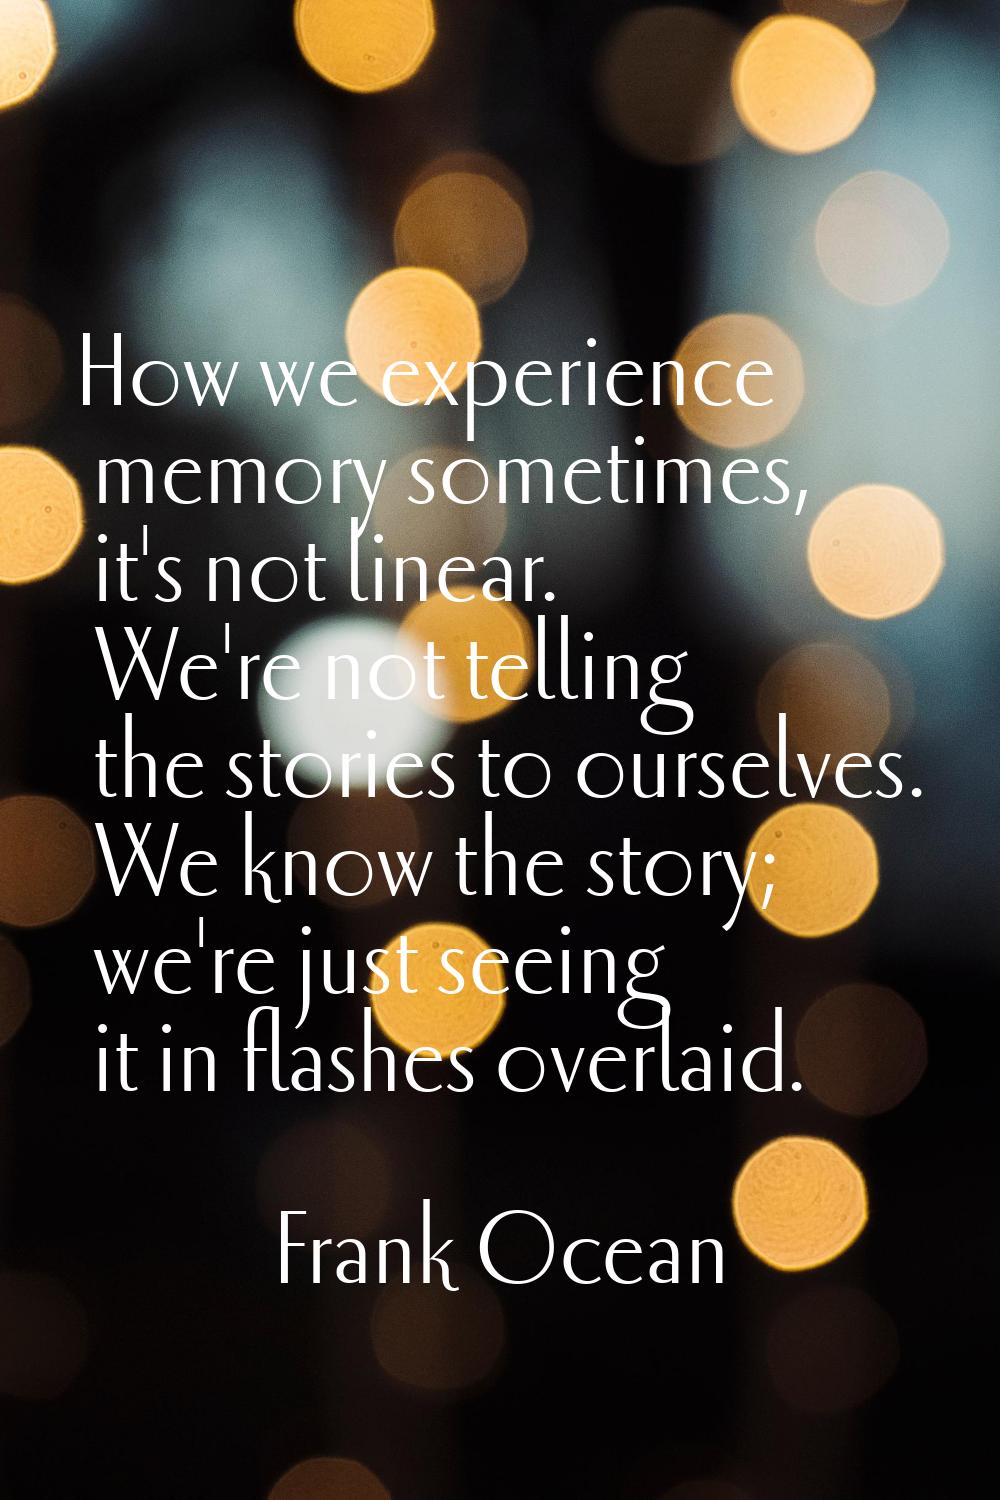 How we experience memory sometimes, it's not linear. We're not telling the stories to ourselves. We